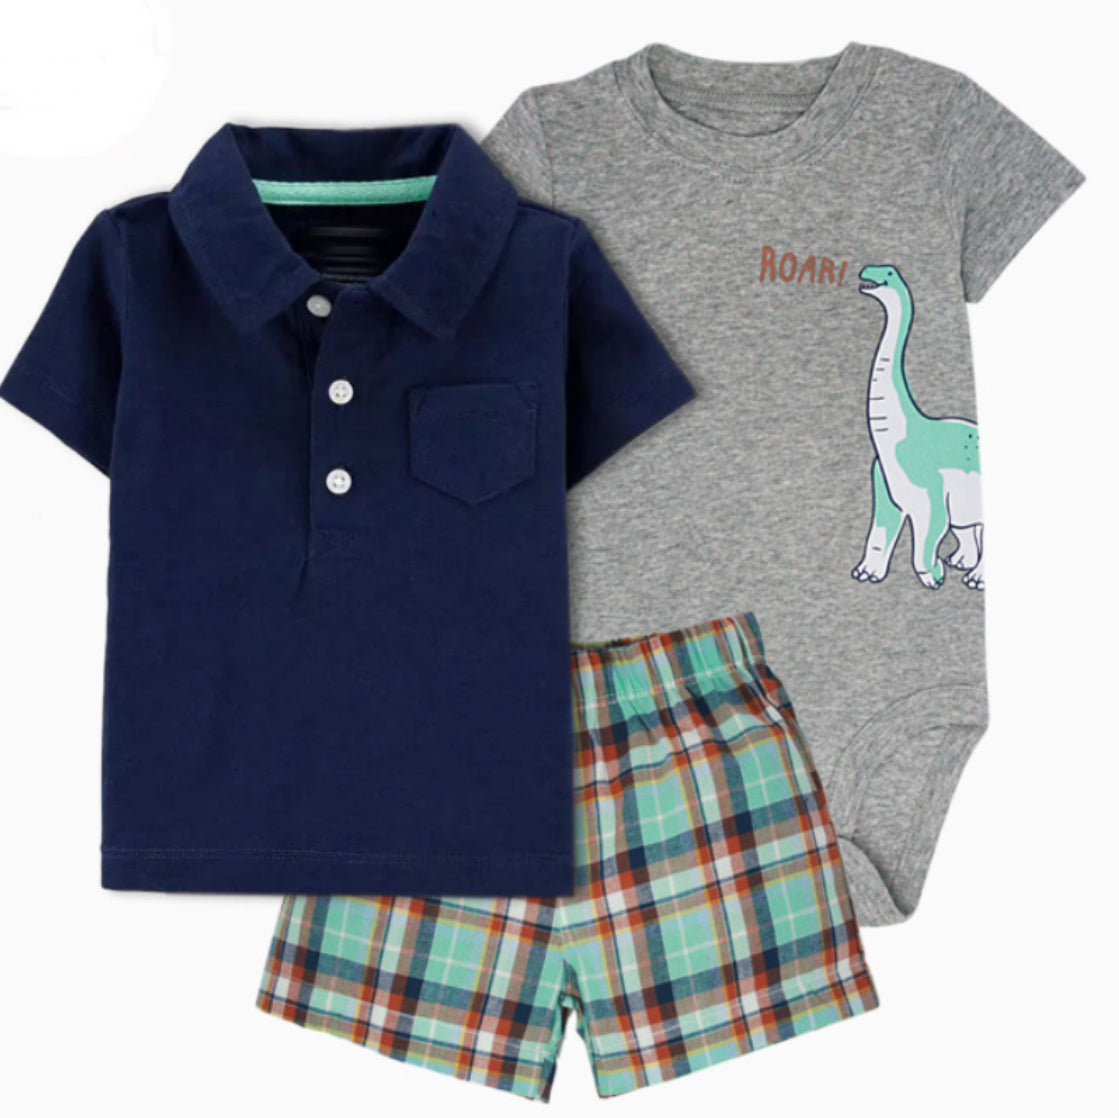 Boys Classic 3 piece set 18-24 months only!